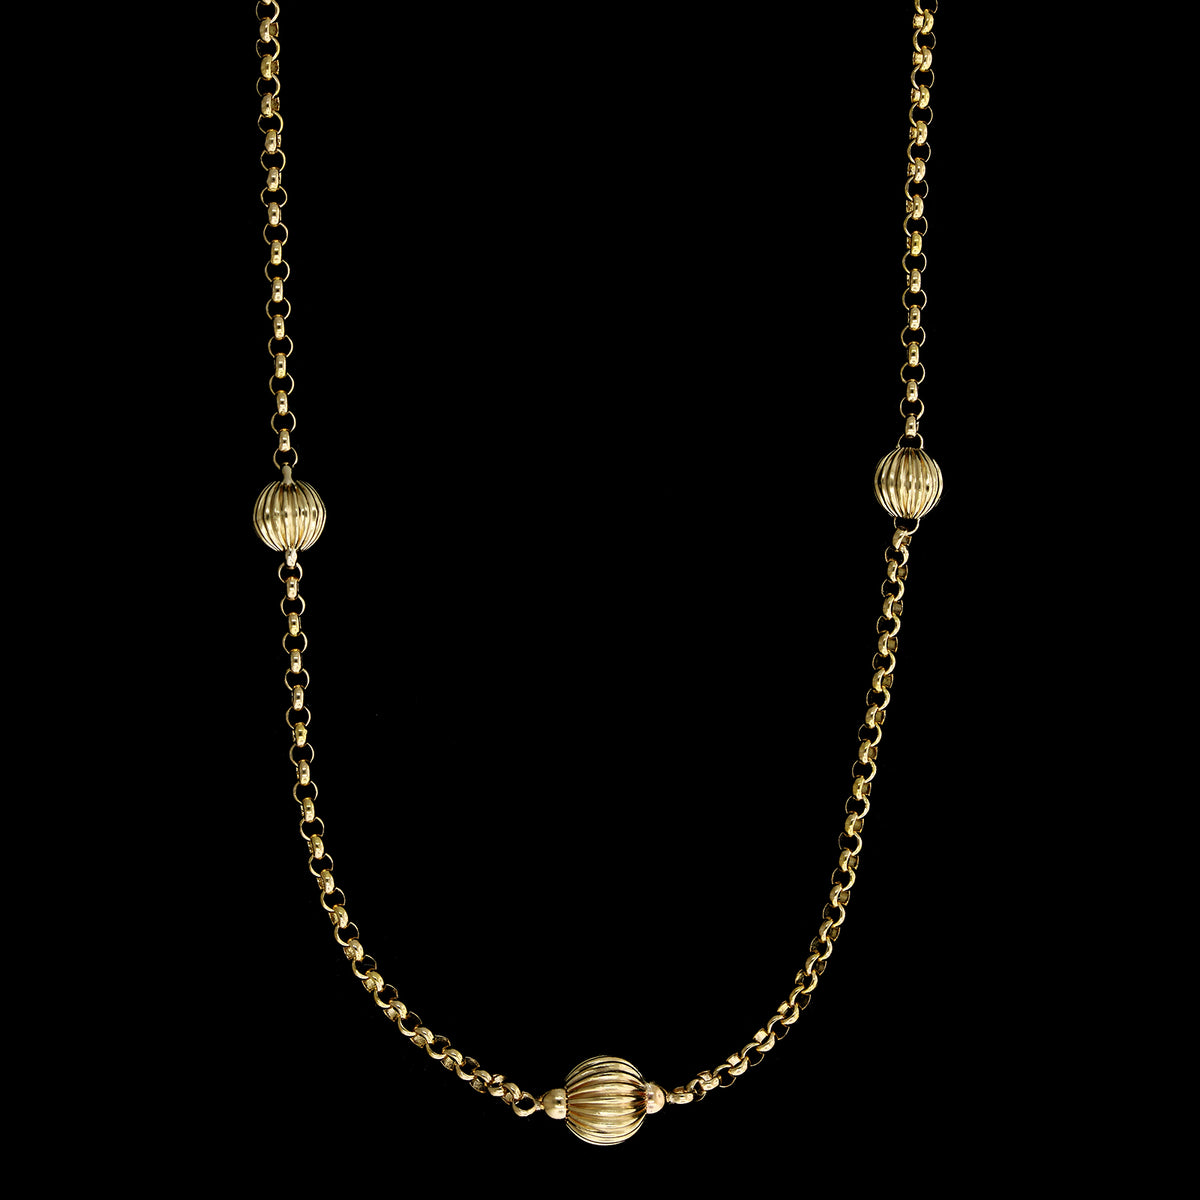 14K Yellow Gold Estate Bead with Link Chain  Length 16"